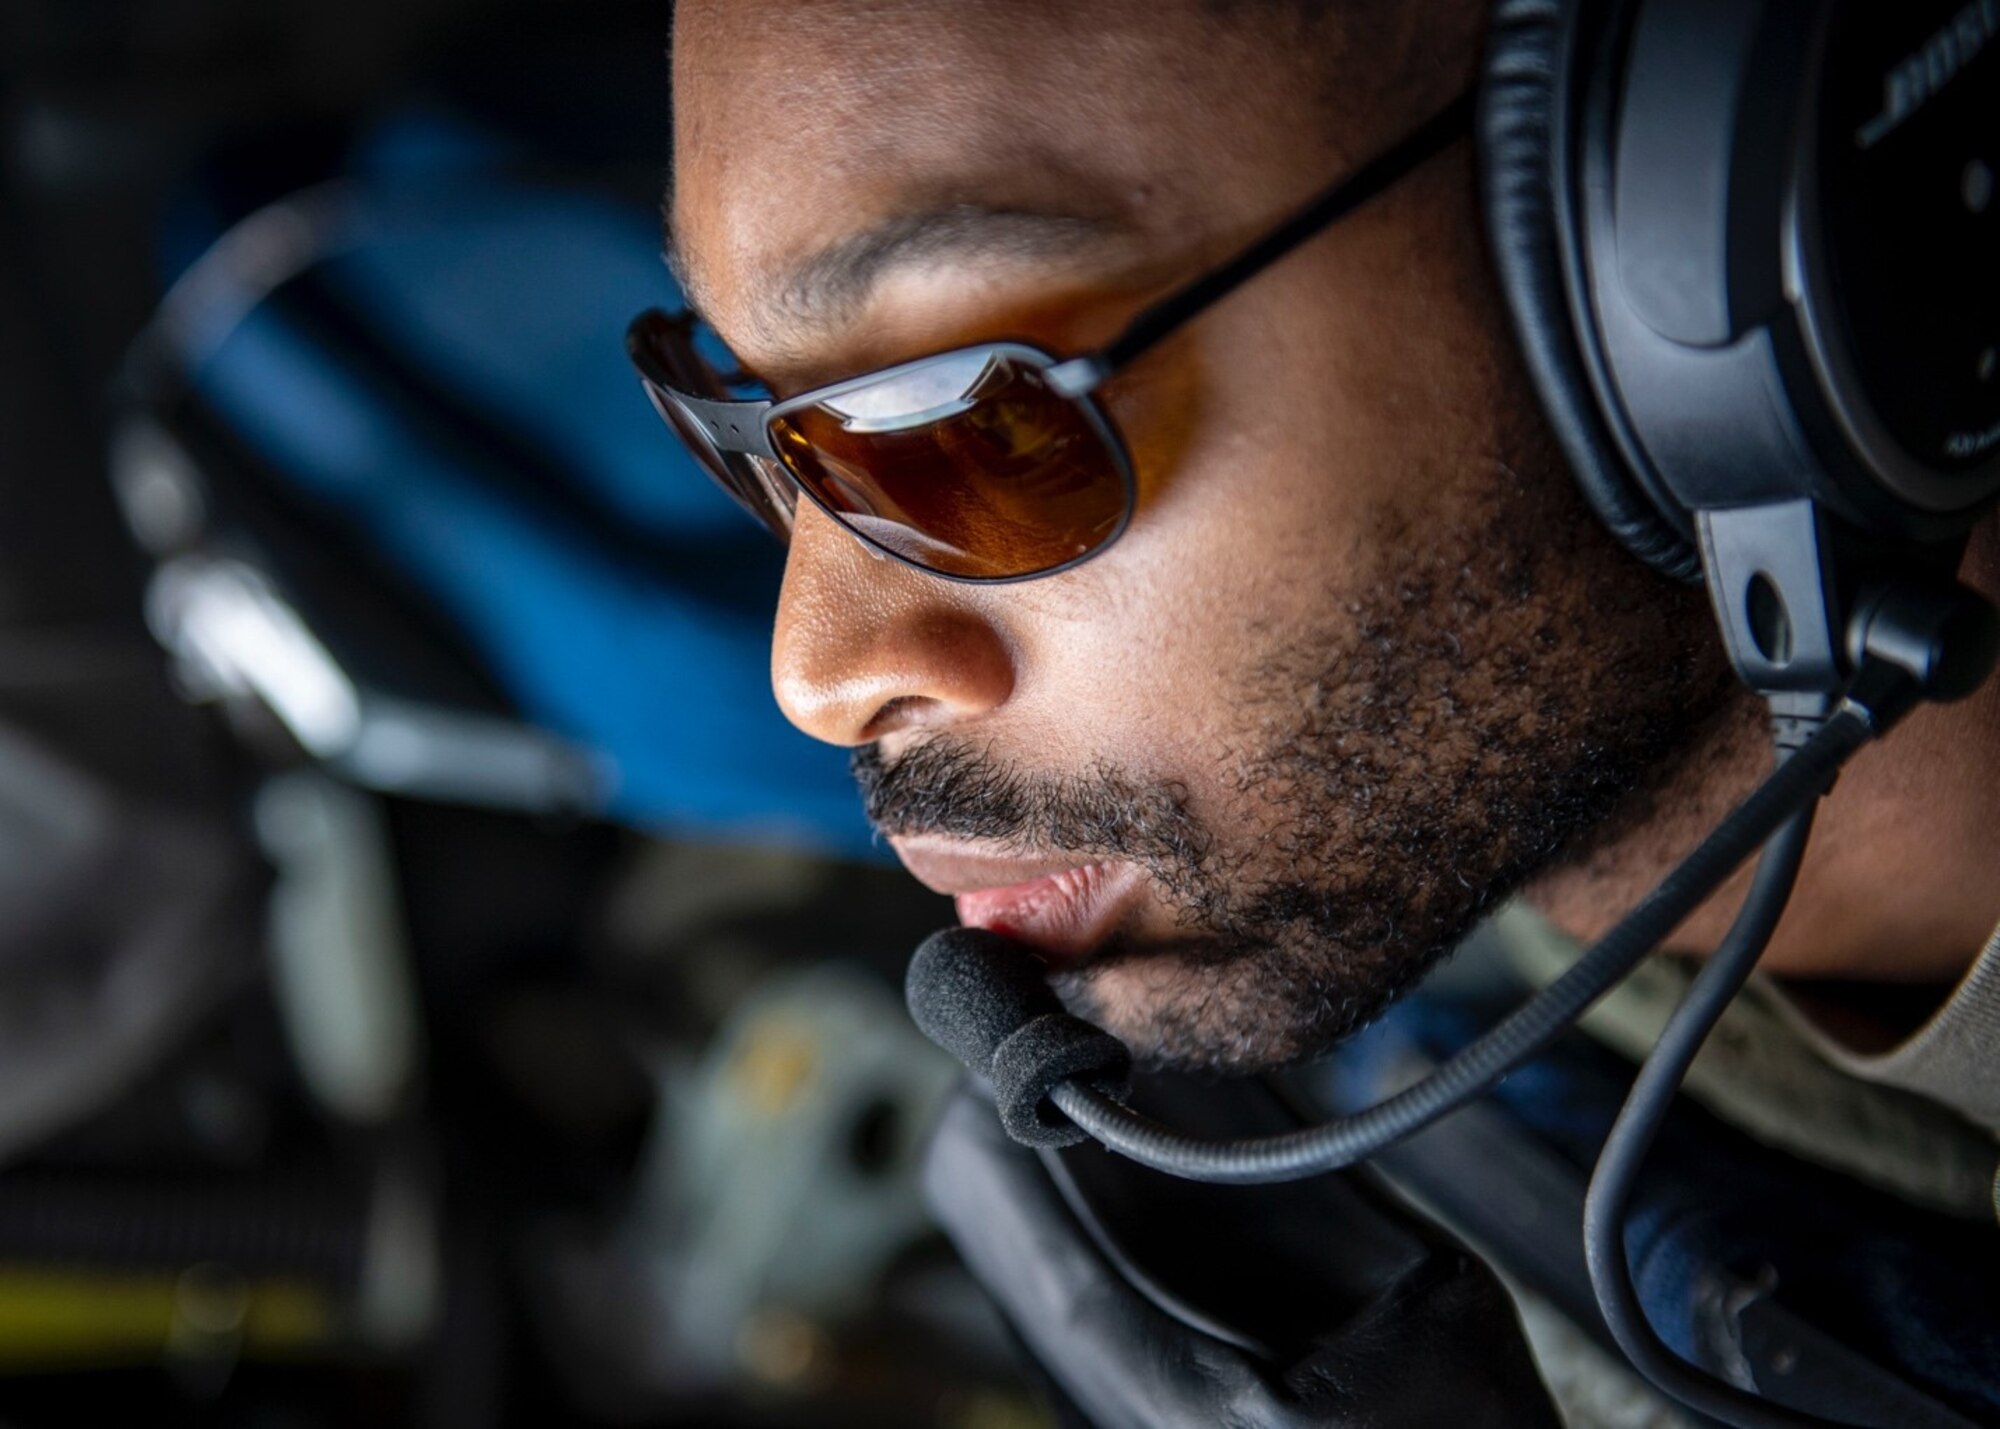 U.S. Air Force Staff Sgt. Jamar Jackson, a KC-135 Startotanker aircraft boom operator assigned to the 91st Air Refueling Squadron tests new Aircrew Laser Eye Protection glasses in the boom pod of a KC-135 during a training mission over the coast of South Carolina, June 23, 2022. Jackson participated in a developmental test of the ALEP glasses conducted by the 46th Test and Evaluation Squadron from Eglin Air Force Base, Florida. (U.S. Air Force photo by Airman 1st Class Lauren Cobin)